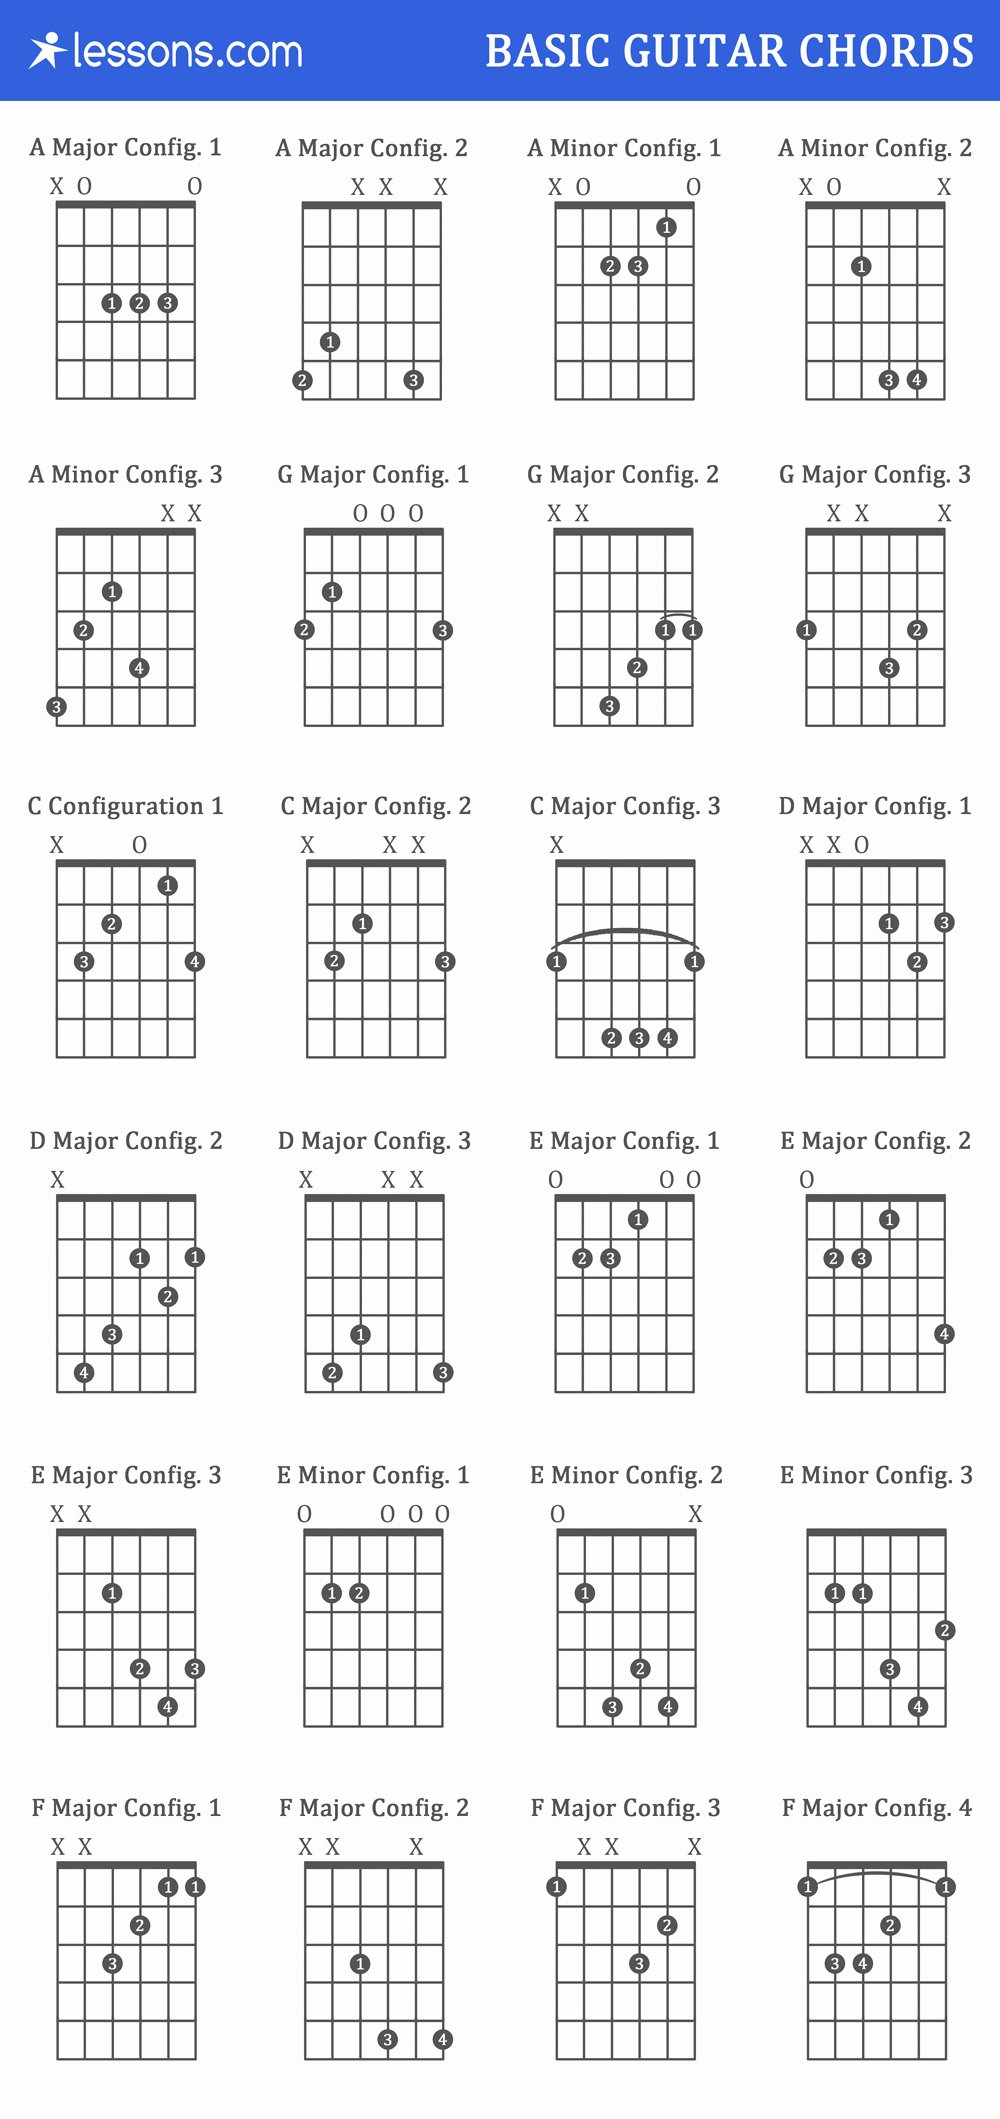 Basic Guitar Chord Chart Unique the 8 Basic Guitar Chords for Beginners with Charts